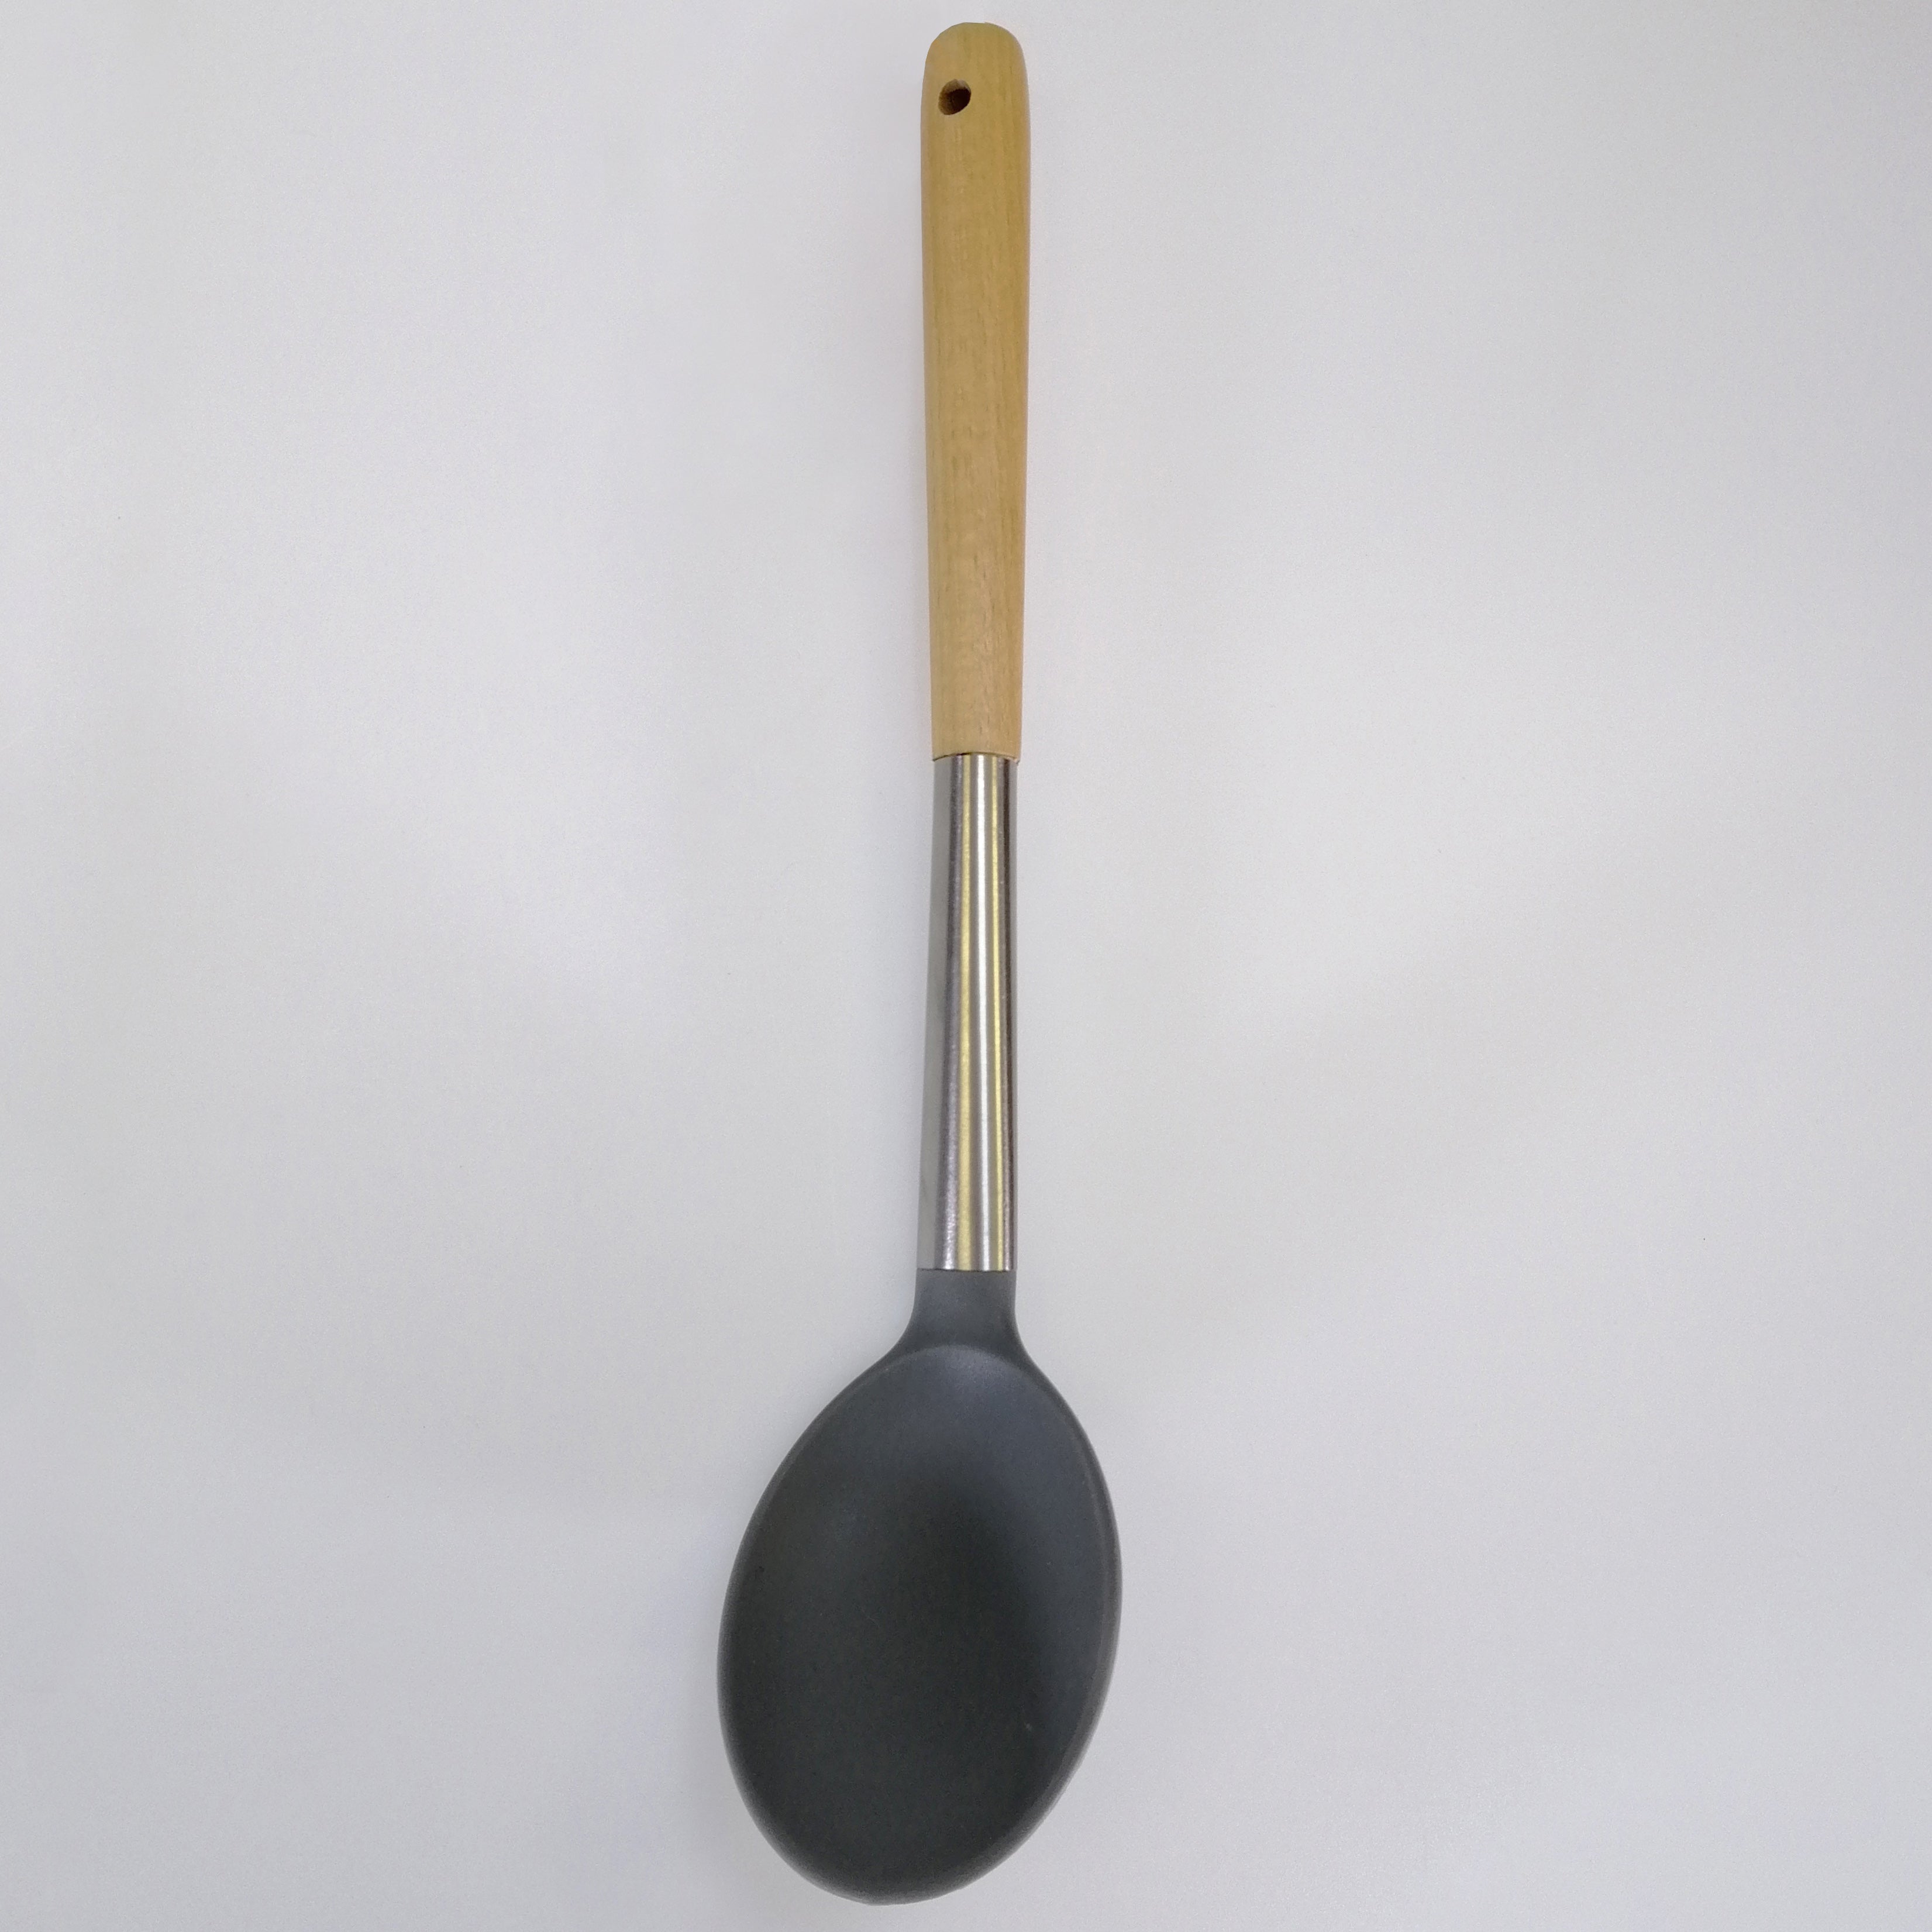 Cookstyle Large Spoon Utensil